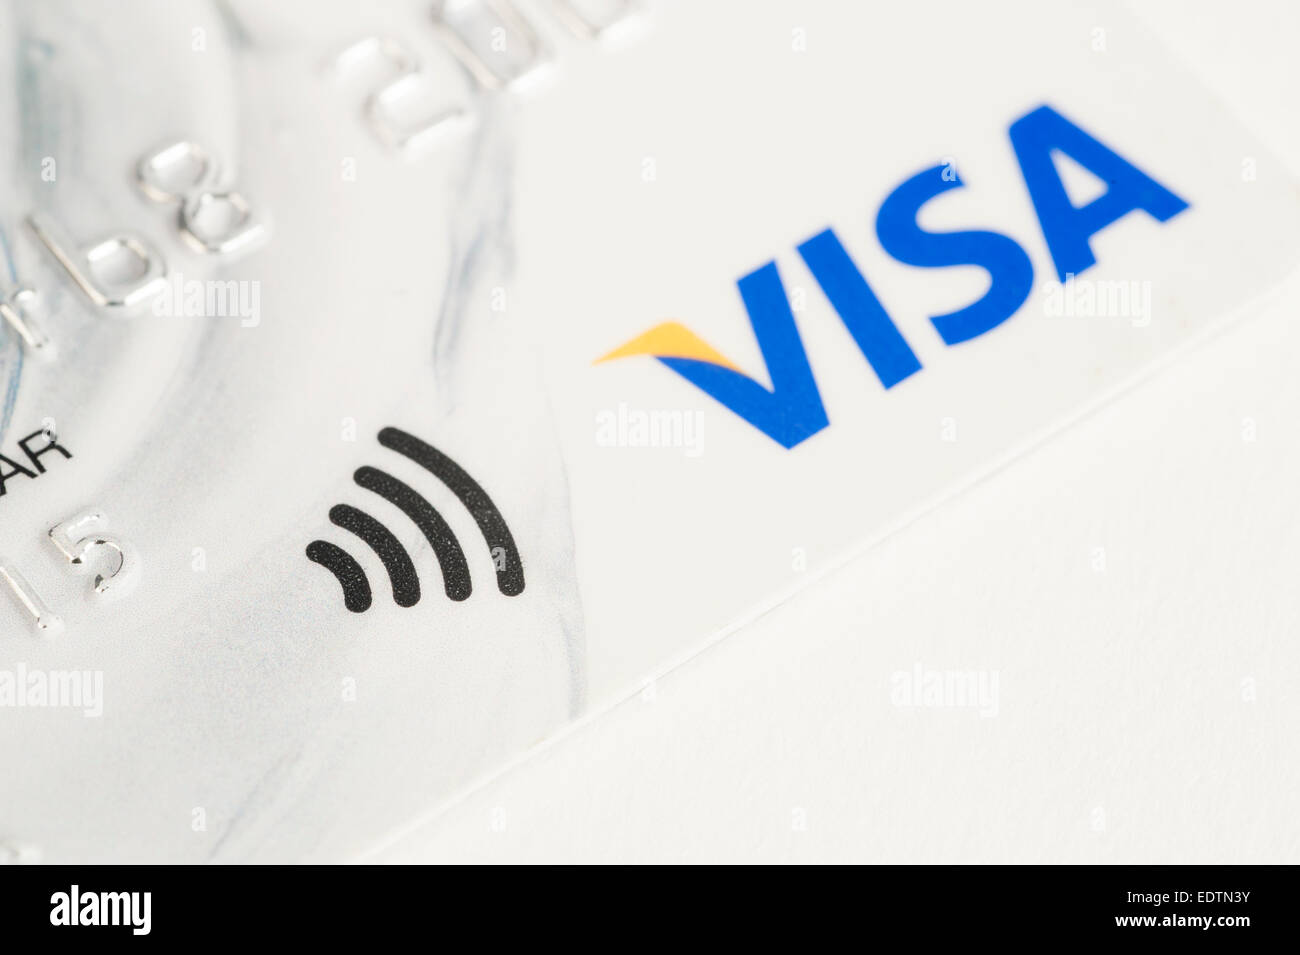 White contactless Visa card close-up detail Stock Photo